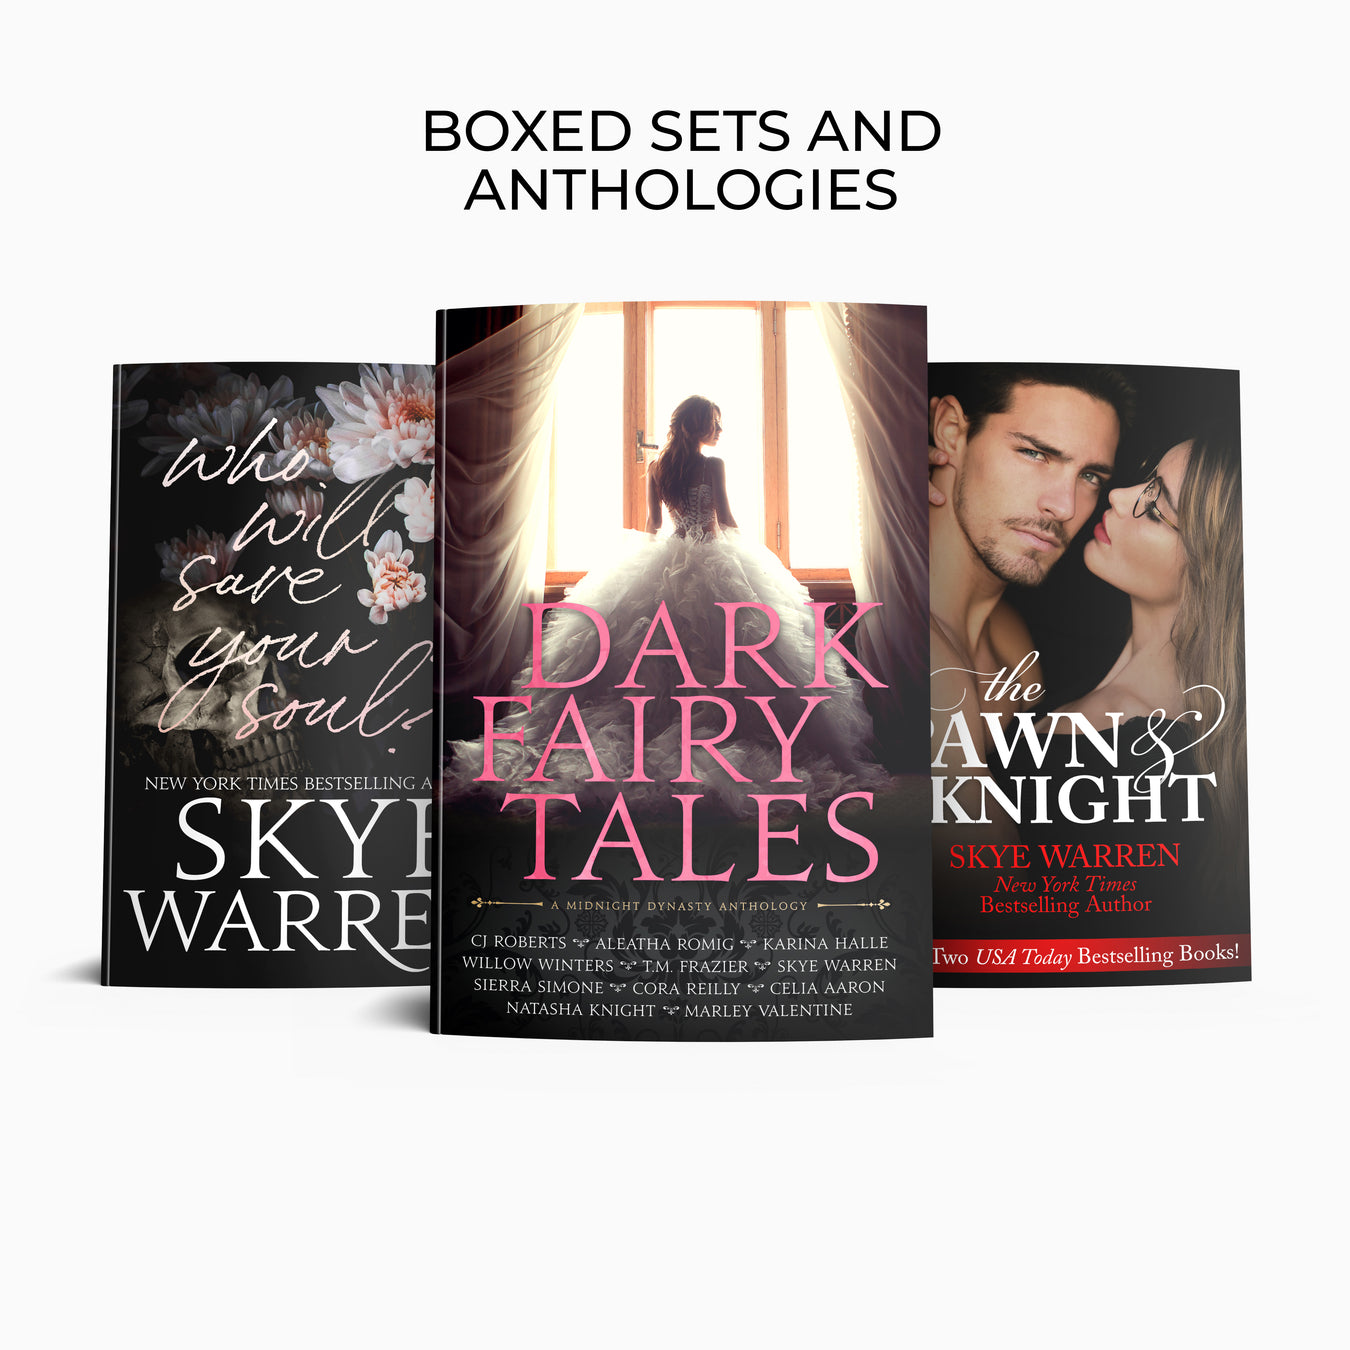 Boxed Sets and Anthologies